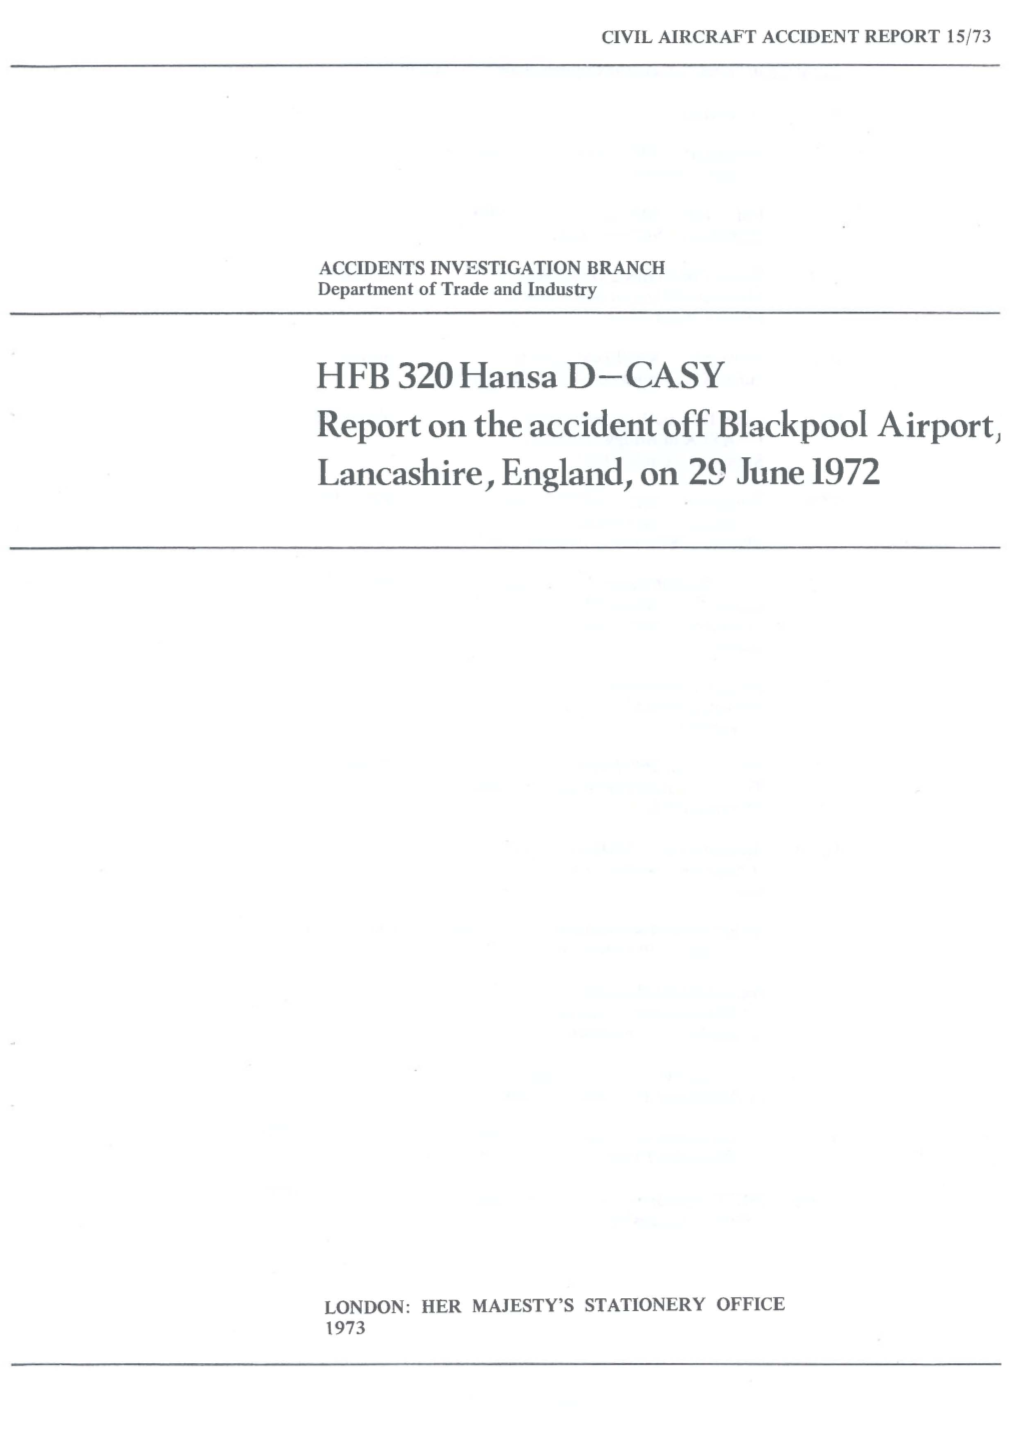 HFB 320 Hansa D-CASY Report on the Accident Off Blackpool Airport J